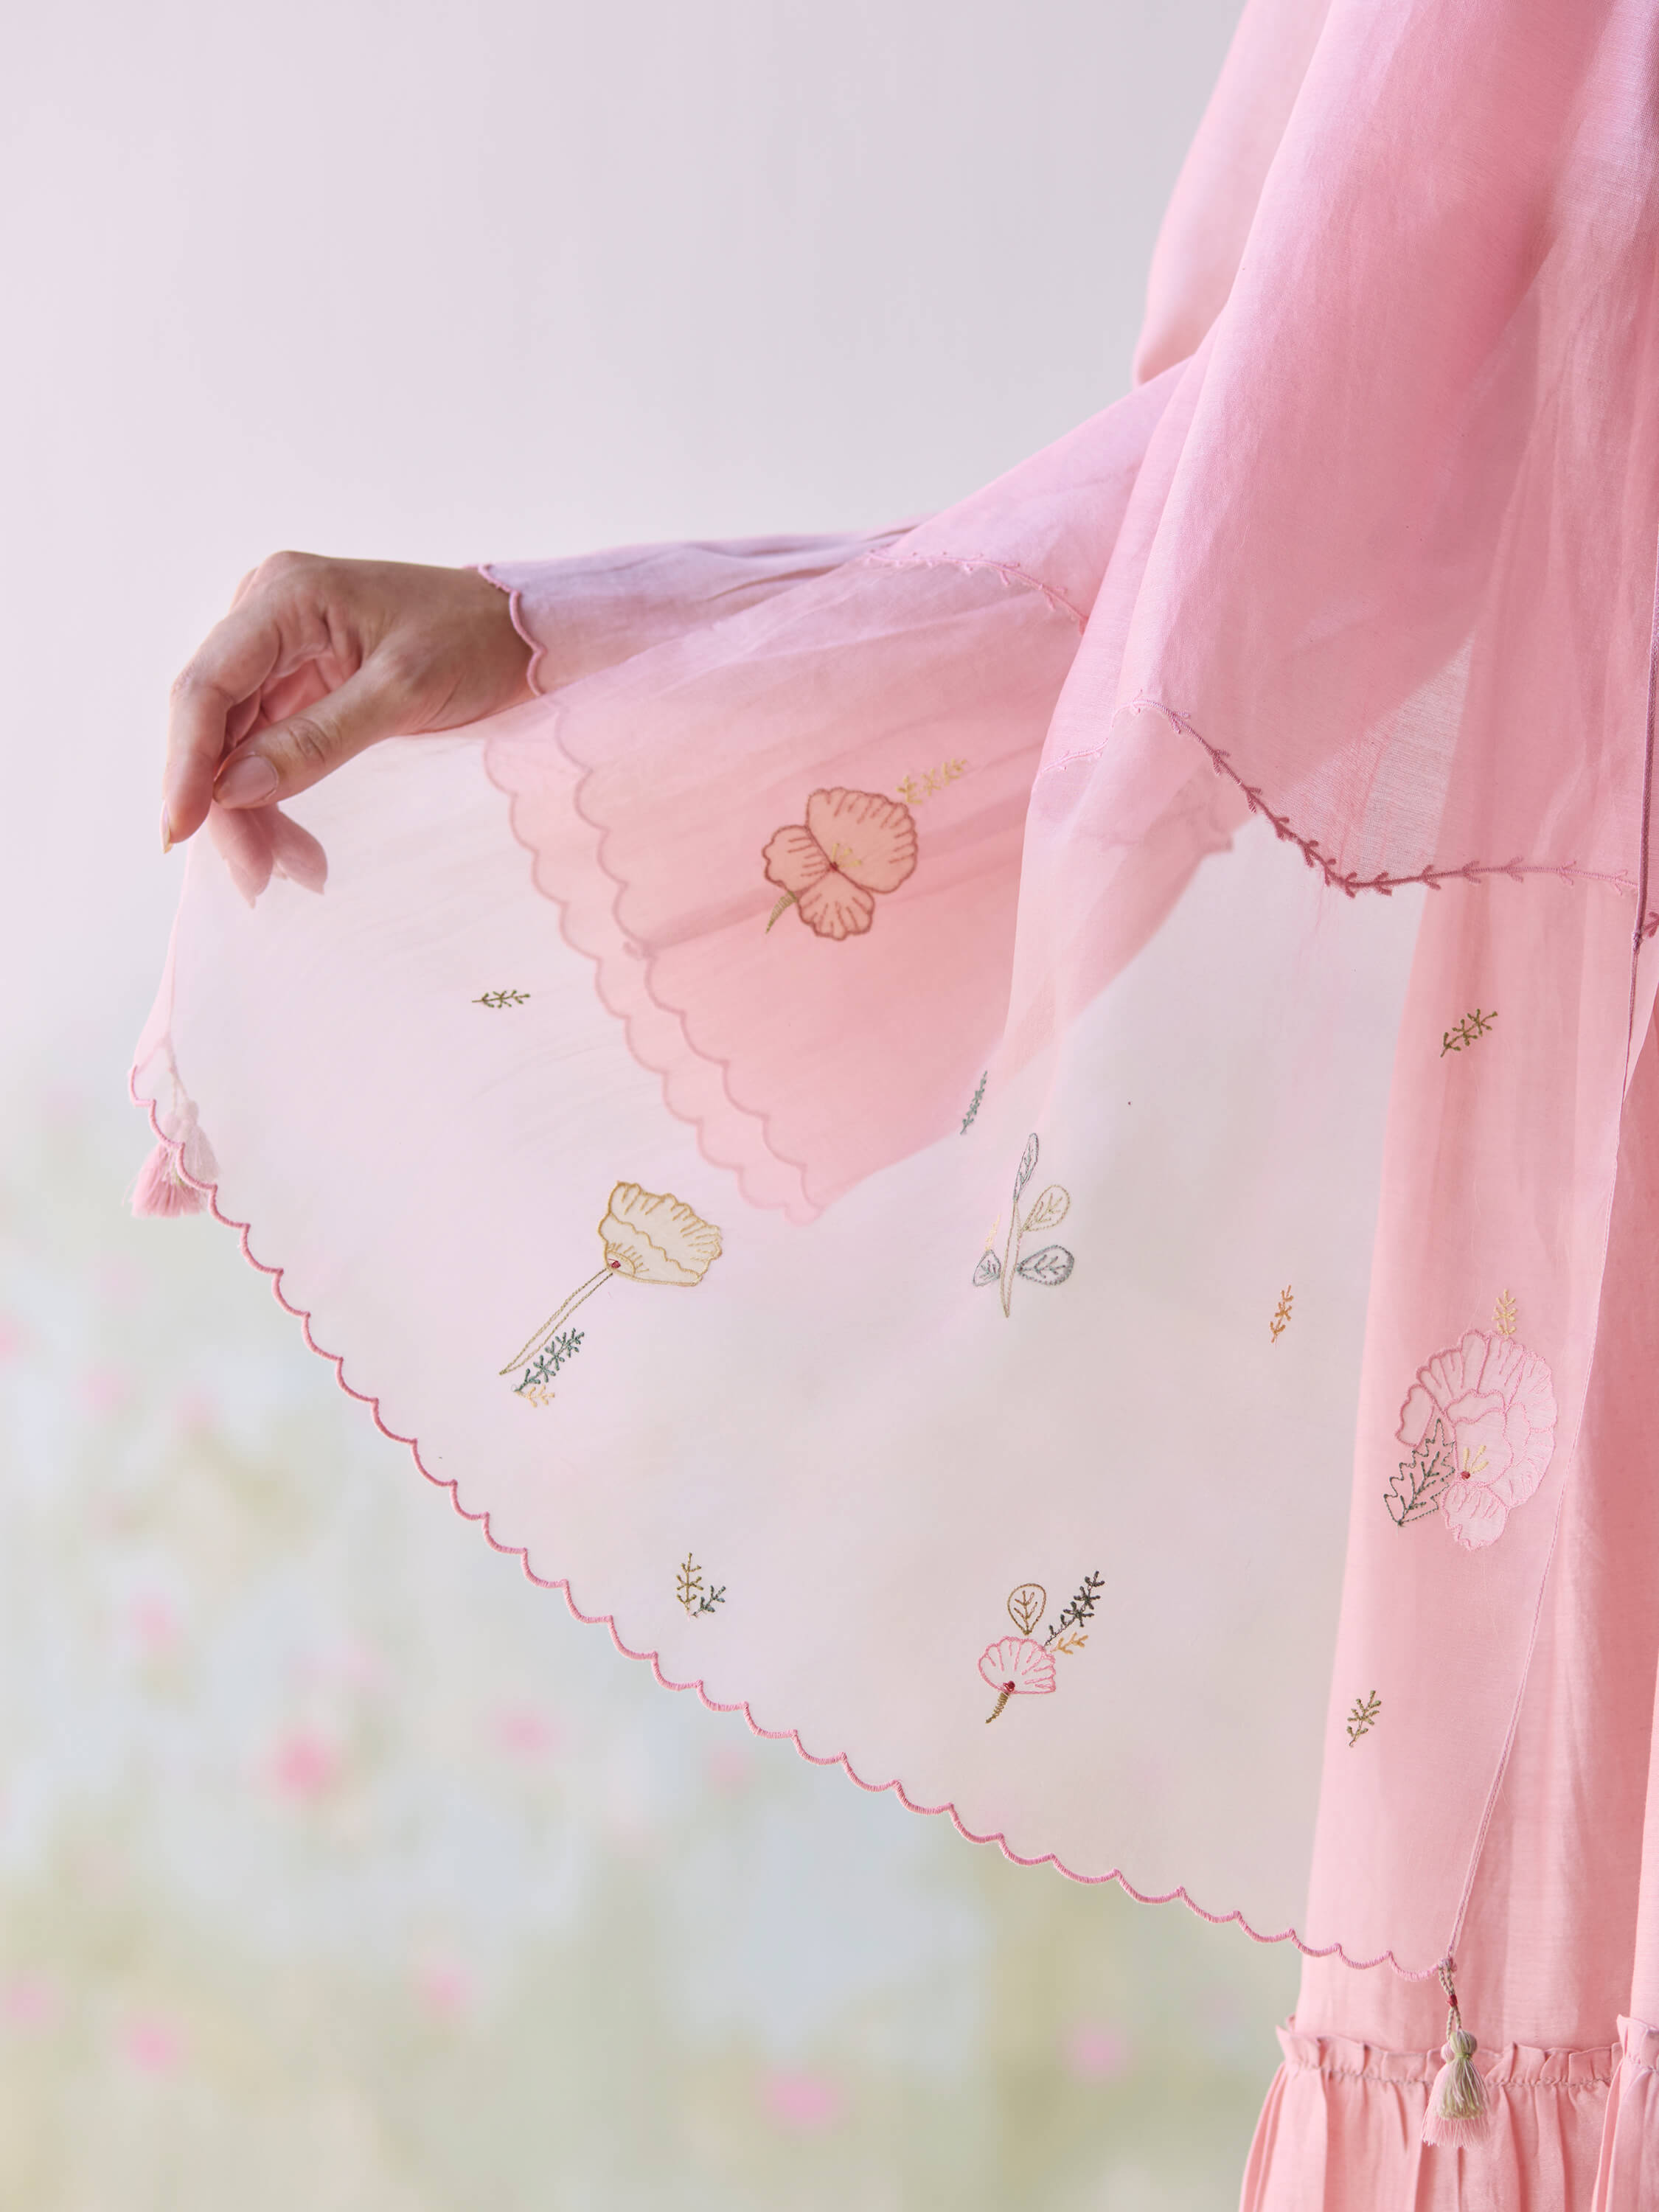 Close-up of pink chiffon sleeve with delicate floral embroidery.